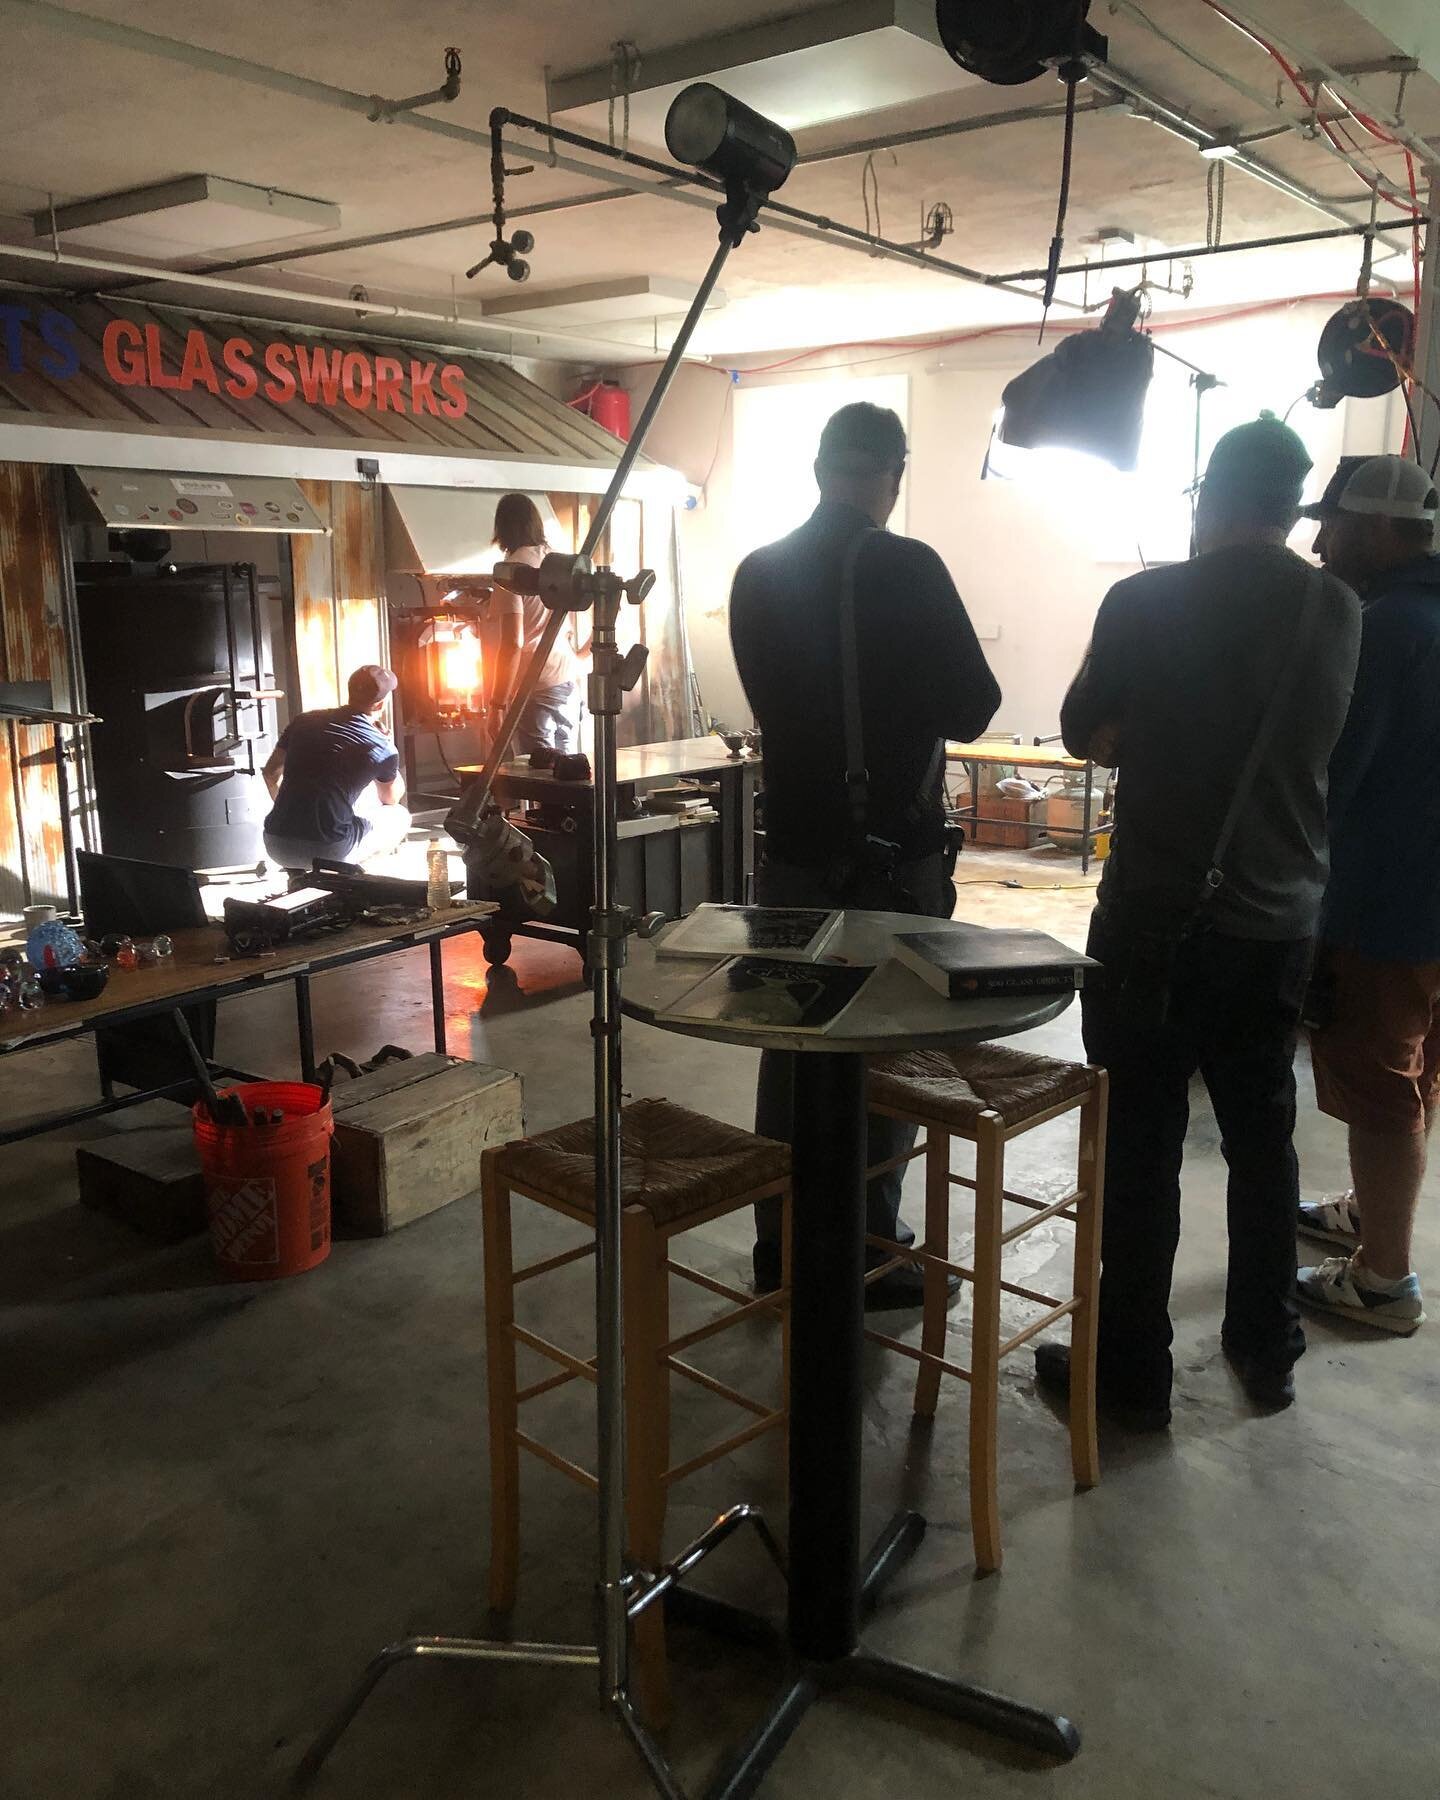 Just another day at the Office. #mainetourism Association is filming a promotional video at the glass studio, to promote the Arts in Maine. This should be fun #waterfallarts #lightsactioncamera #jacobsonglass #maine #maineglass #belfast #belfastmaine